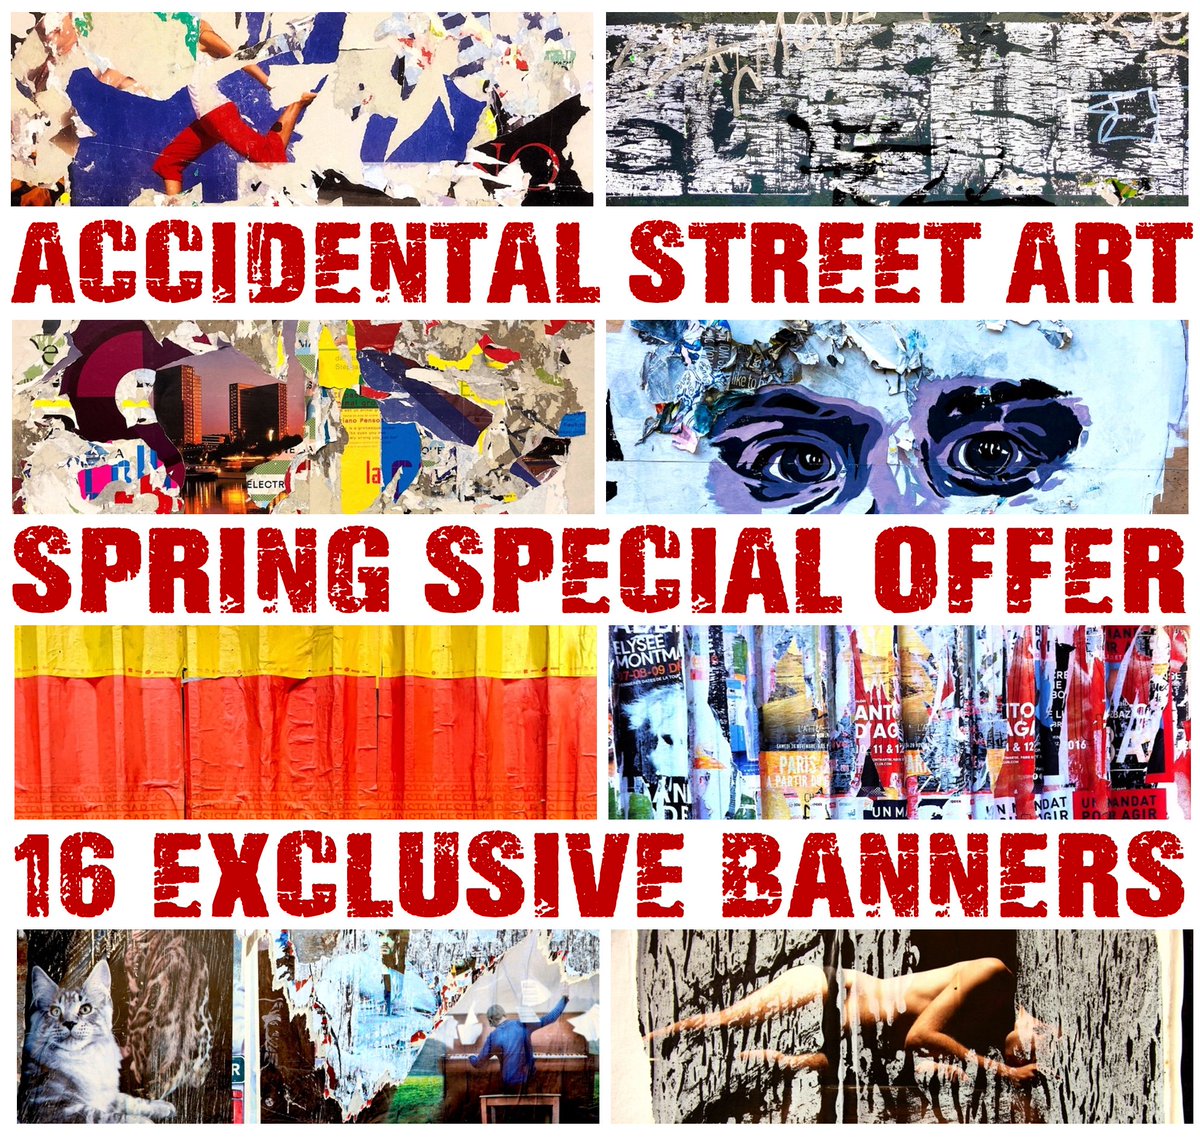 🚨 Spring’s special offer 🌼 16 exclusive banners available on #OpenSea ➡️ opensea.io/collection/asa…… 0.008 ETH, no fee. Giveaway drawn among holders every 4 sold banners: 1 in 4 chance to get one free! 🏙️ #NFTCommunity #StreetArt #collage 🌆